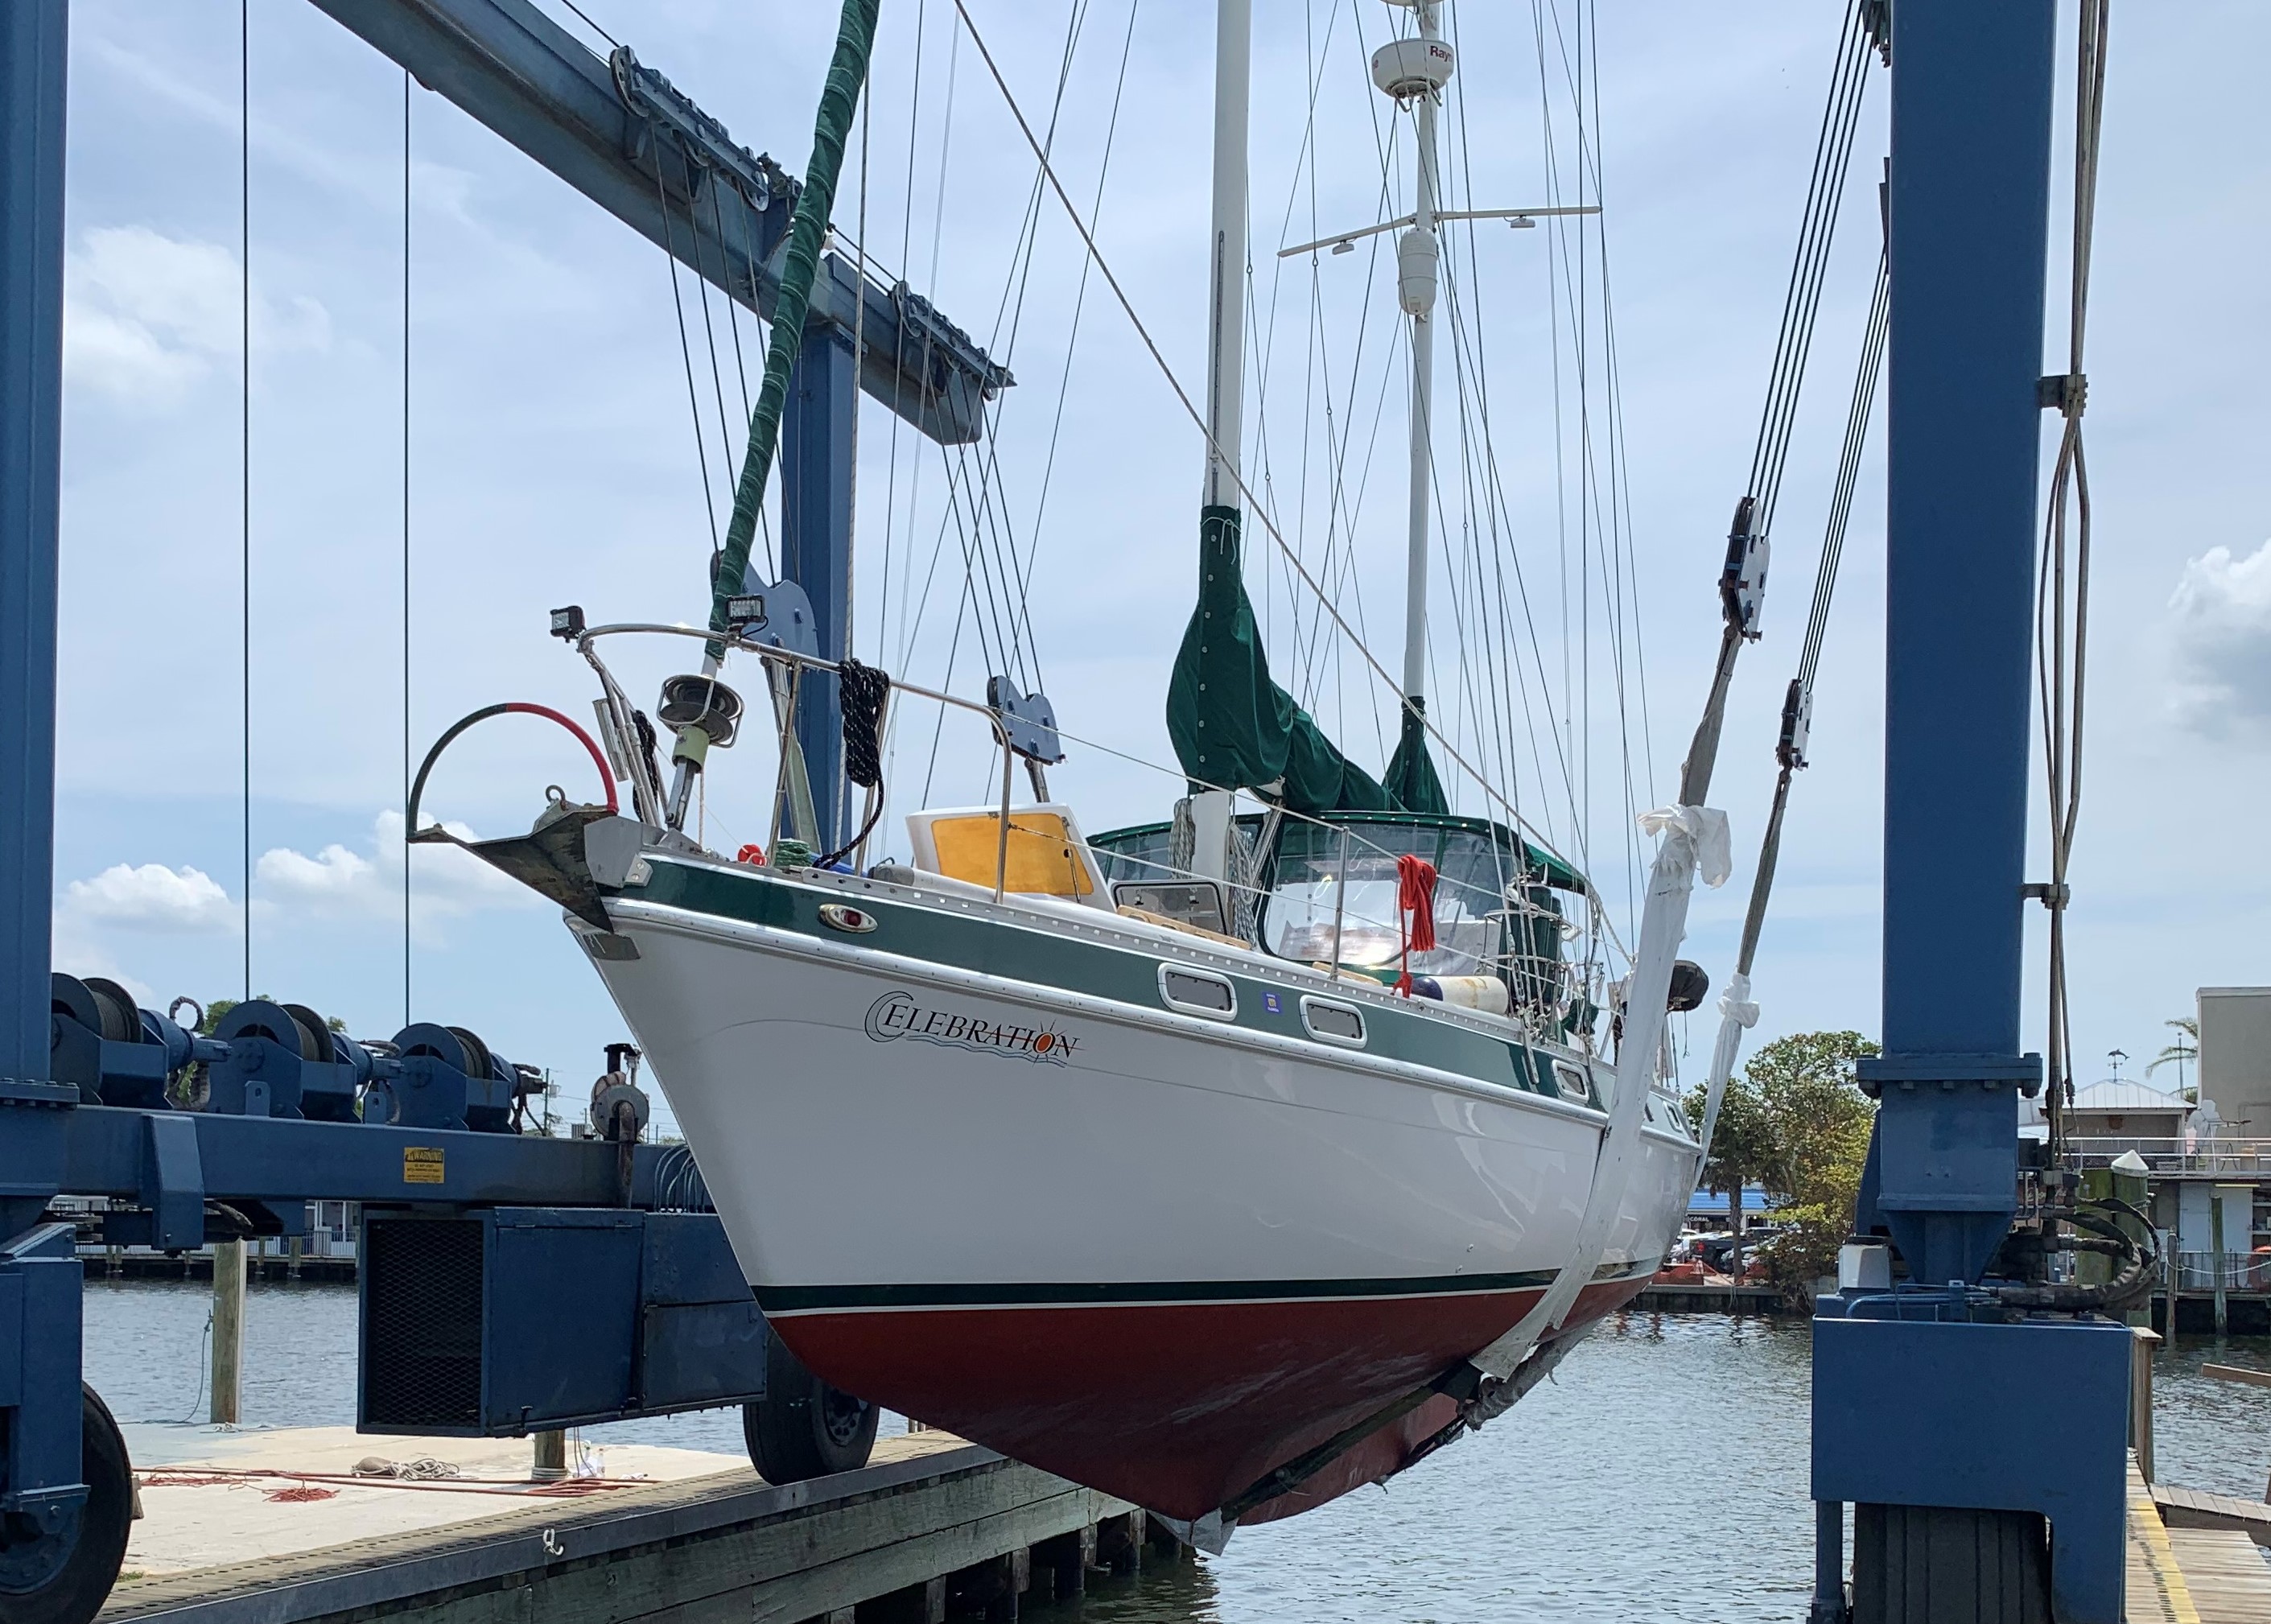 1979 Morgan 415 Out Island Ketch Sailboat for sale in St Petersburg, FL - image 31 